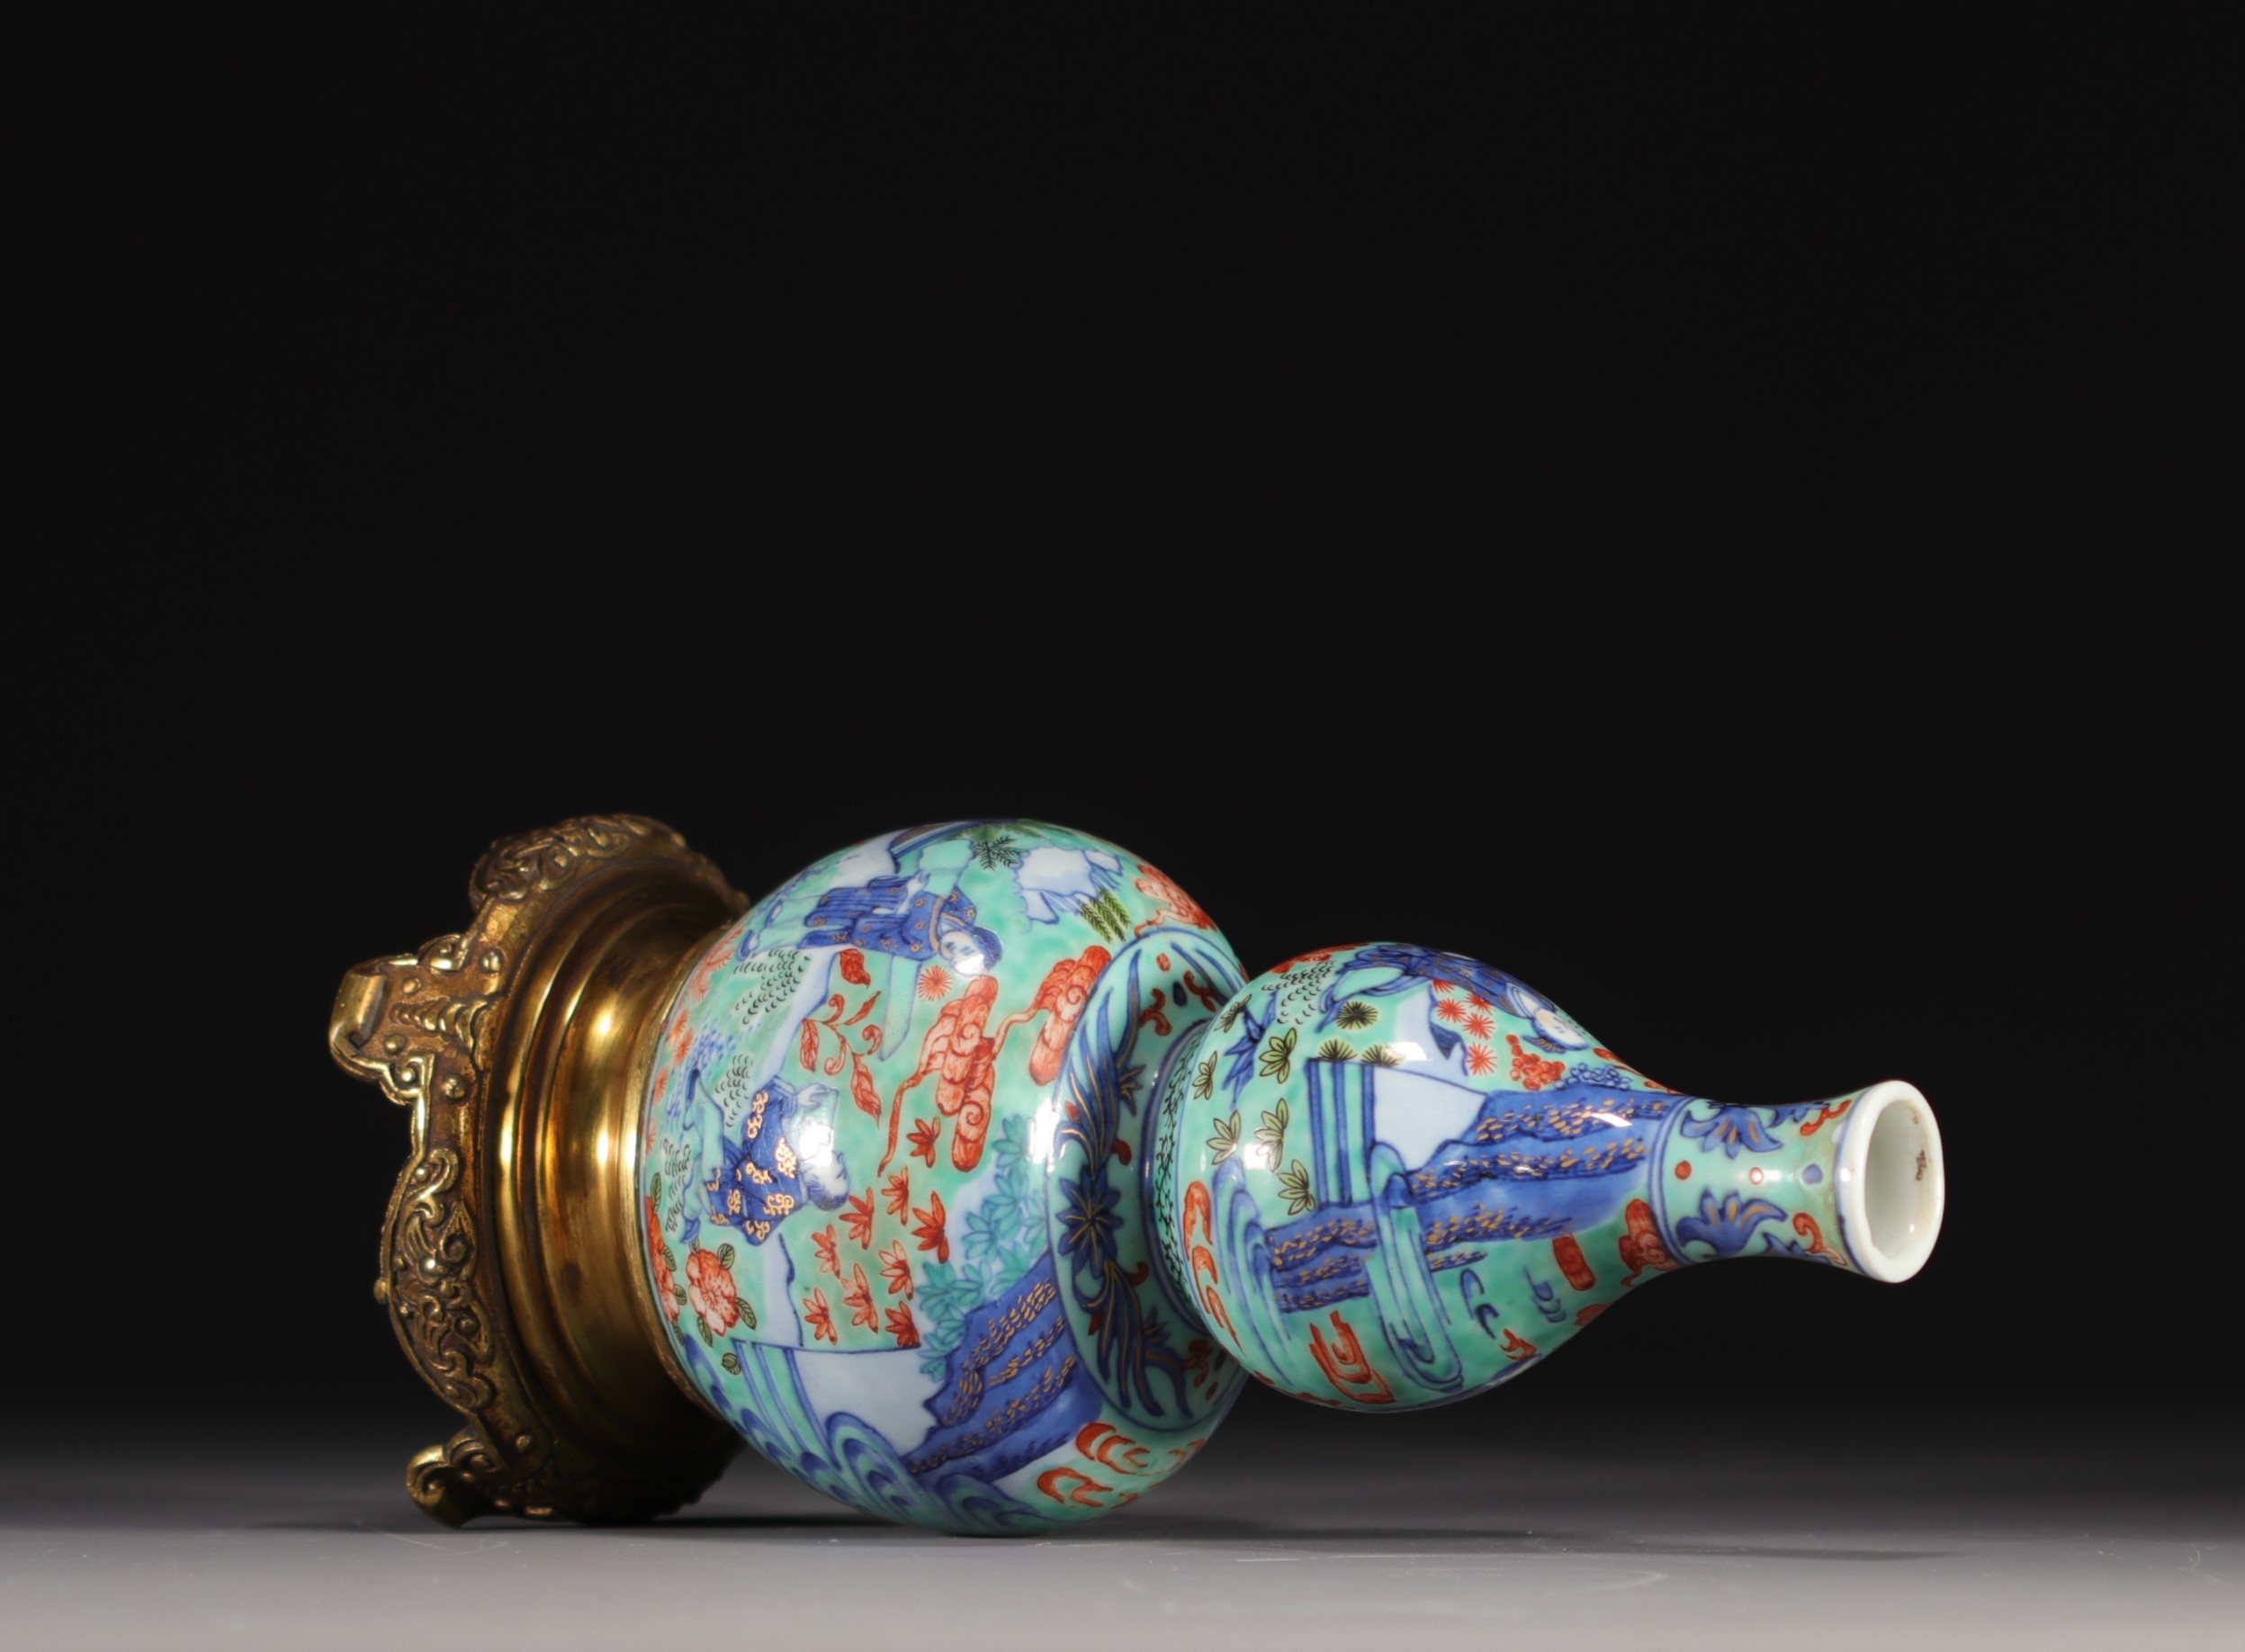 China - Porcelain double gourd vase with figures, gilt bronze mounting, Qing period. - Image 5 of 6